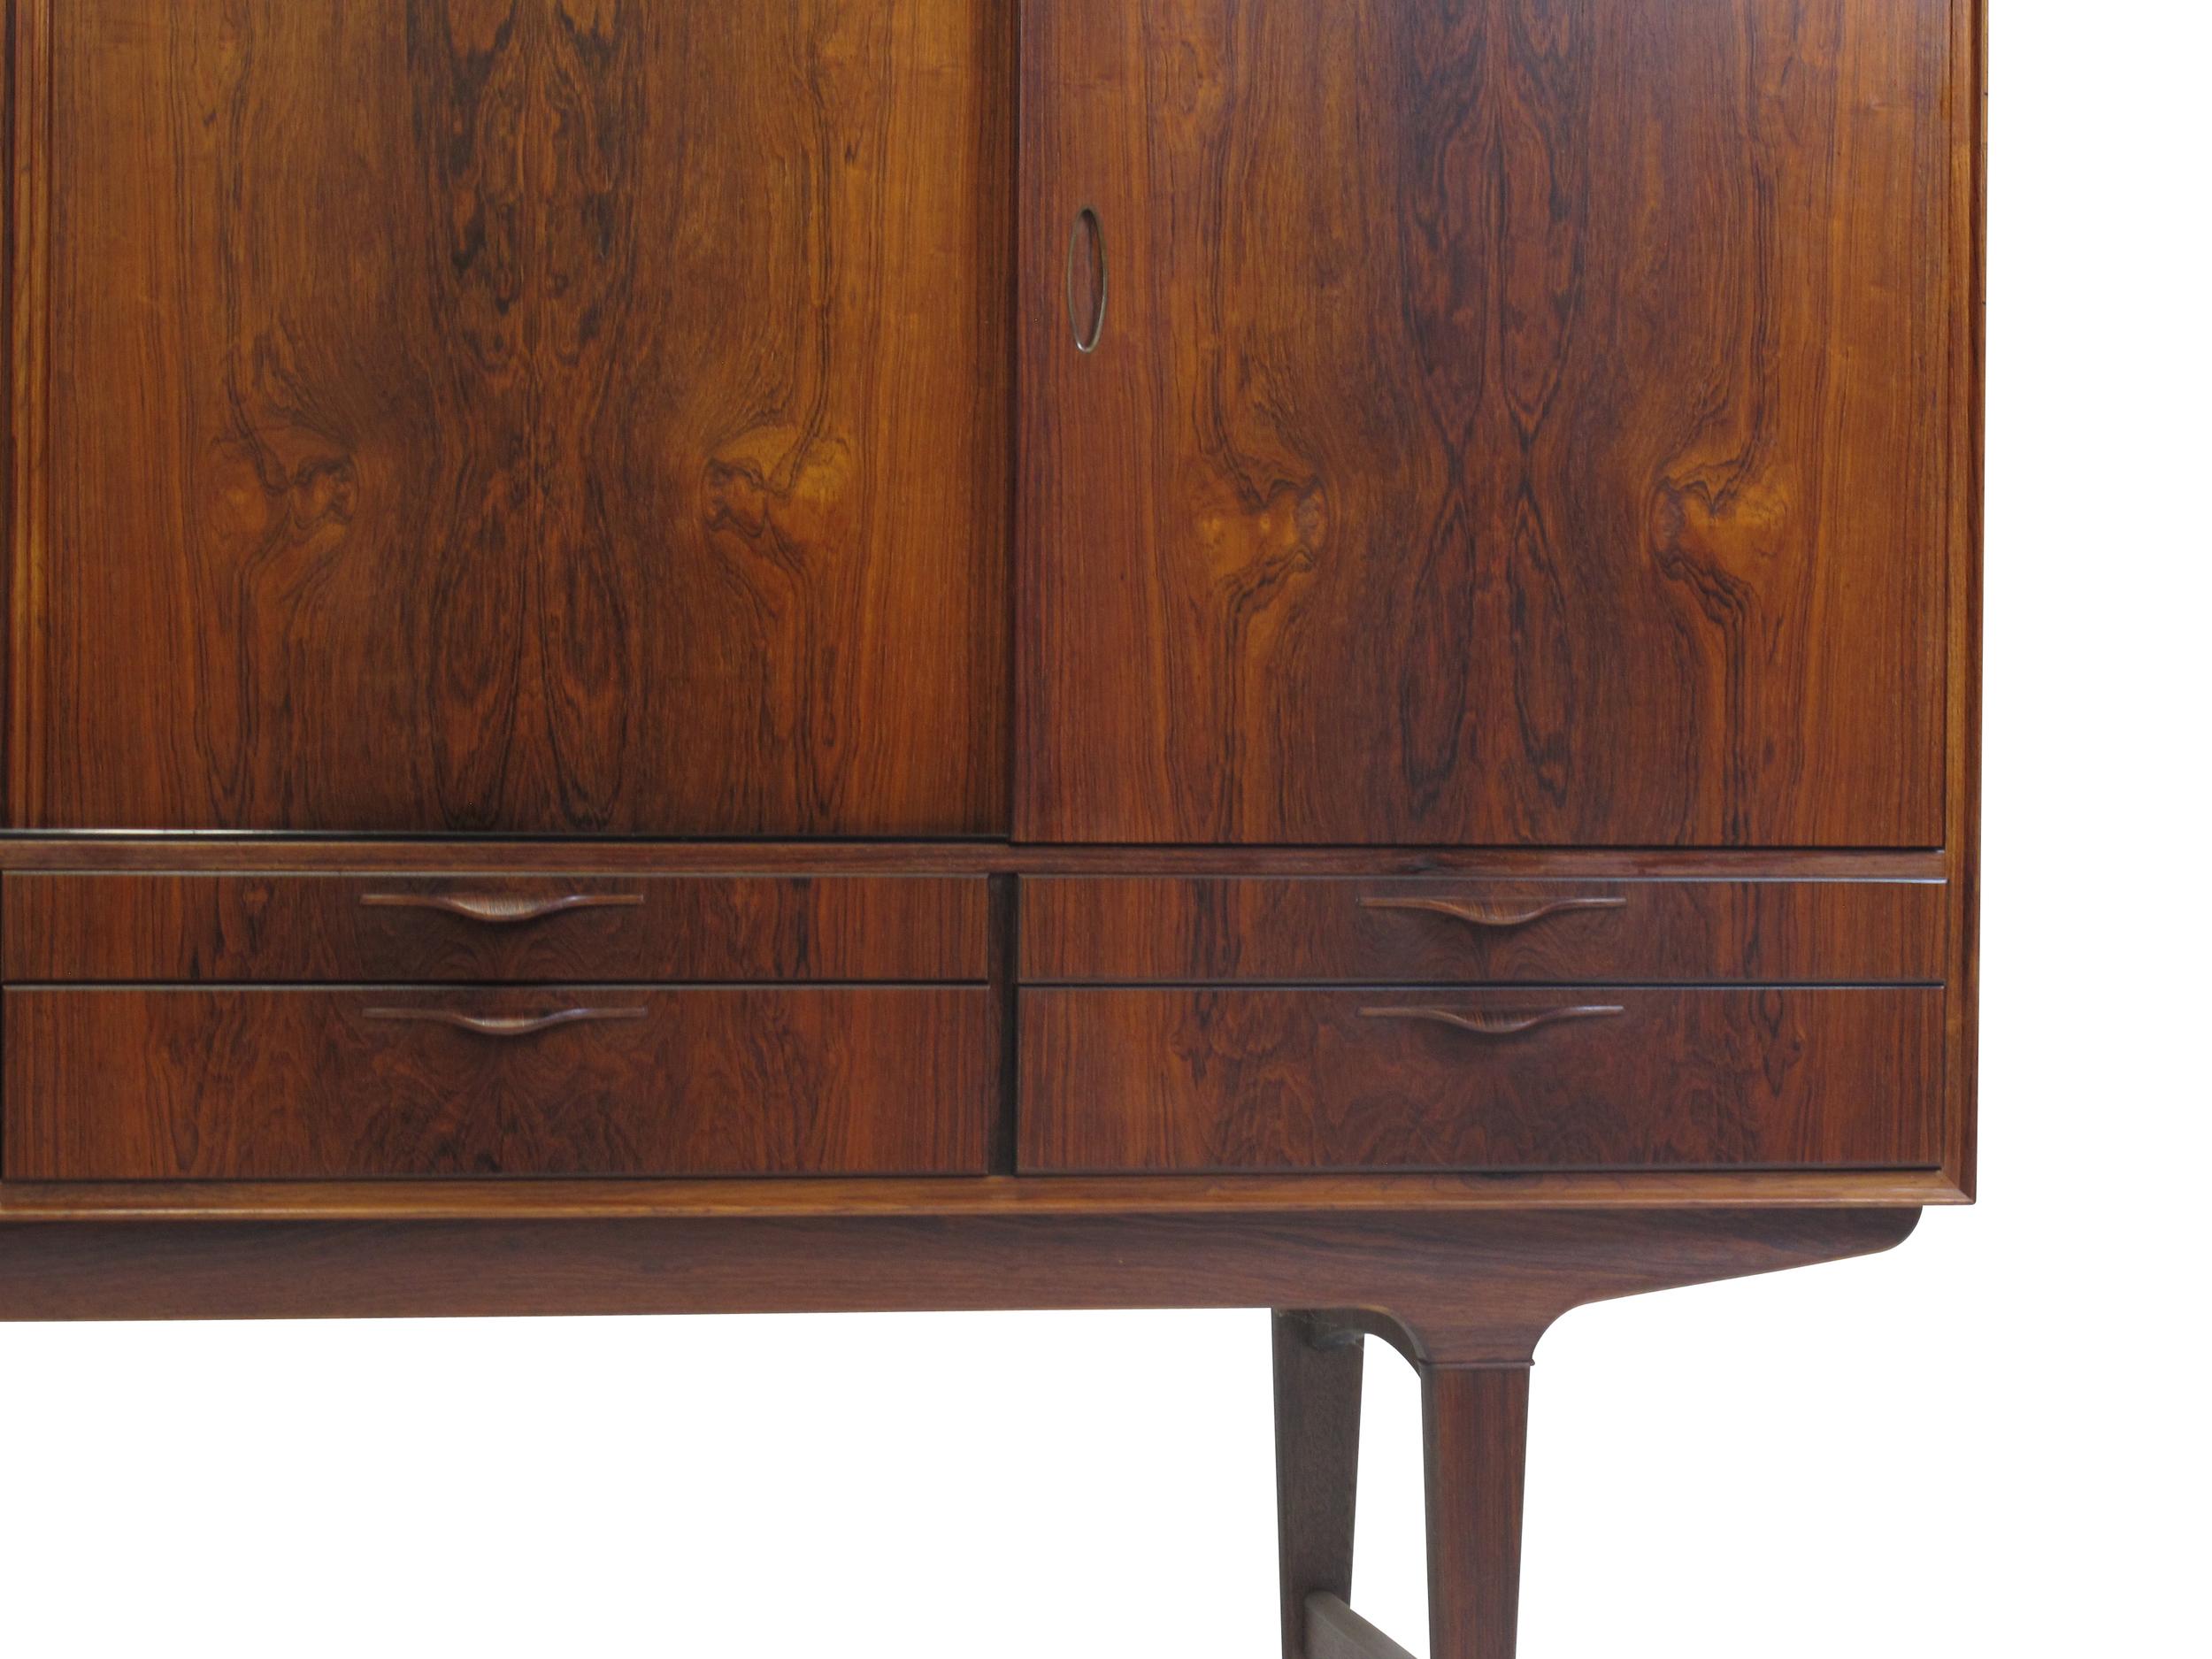 Brazilian rosewood credenza crafted of rosewood, four sliding doors with figured book-matched grain and sculpted pulls, over a series of six drawers raised in stilted legs. The cabinet interior is mahogany with adjustable shelves. The cabinet has